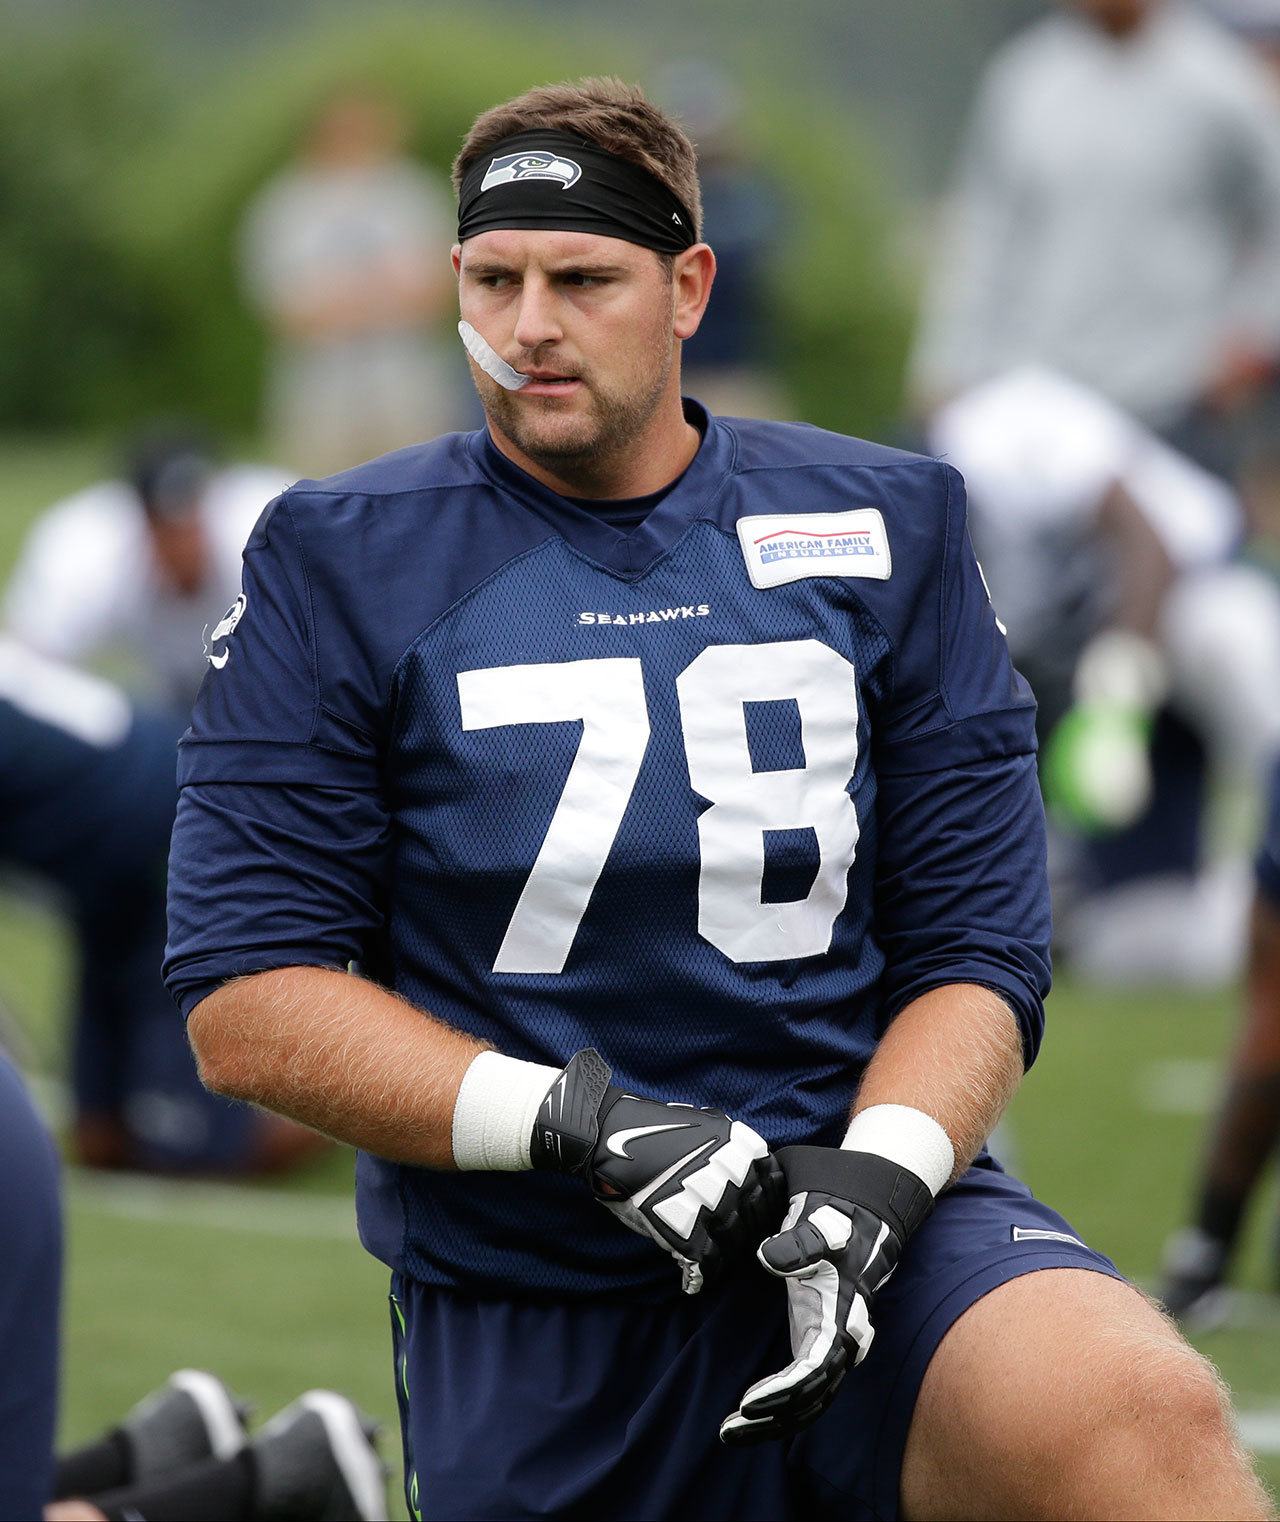 Seahawks tackle Bradley Sowell stretches before a training-camp practice July 30 in Renton. (AP Photo/Elaine Thompson)